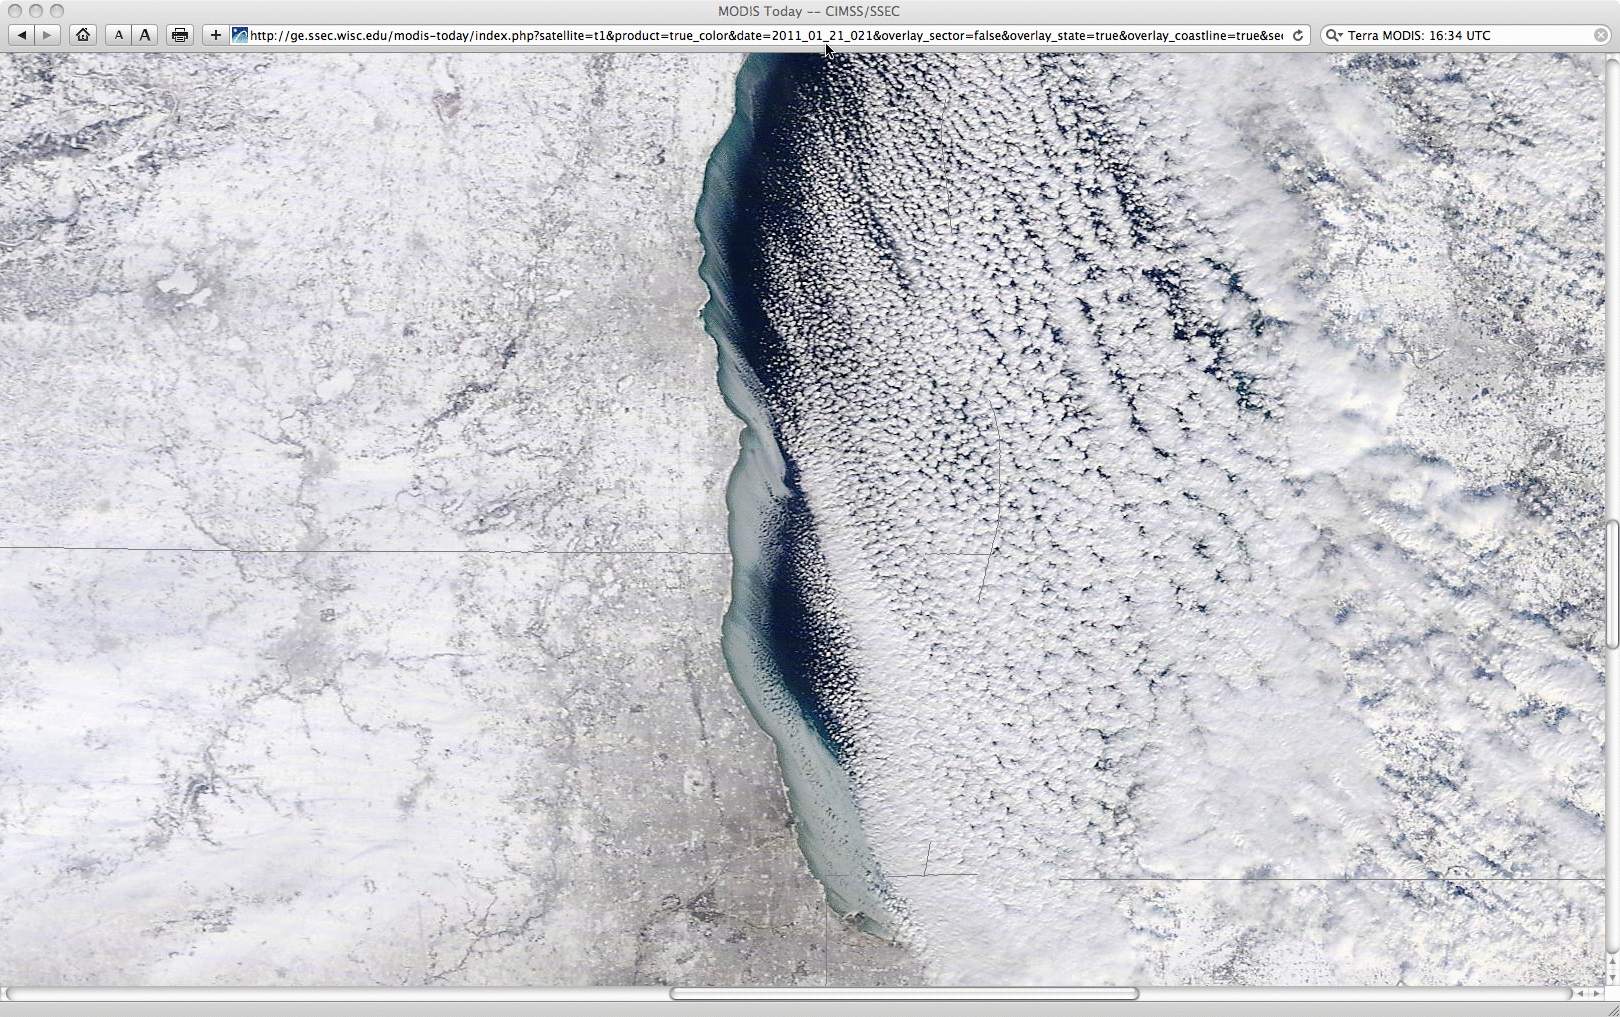 MODIS true color and false color Red/Green/Blue (RGB) images (Milwaukee WI and Chicago IL region)